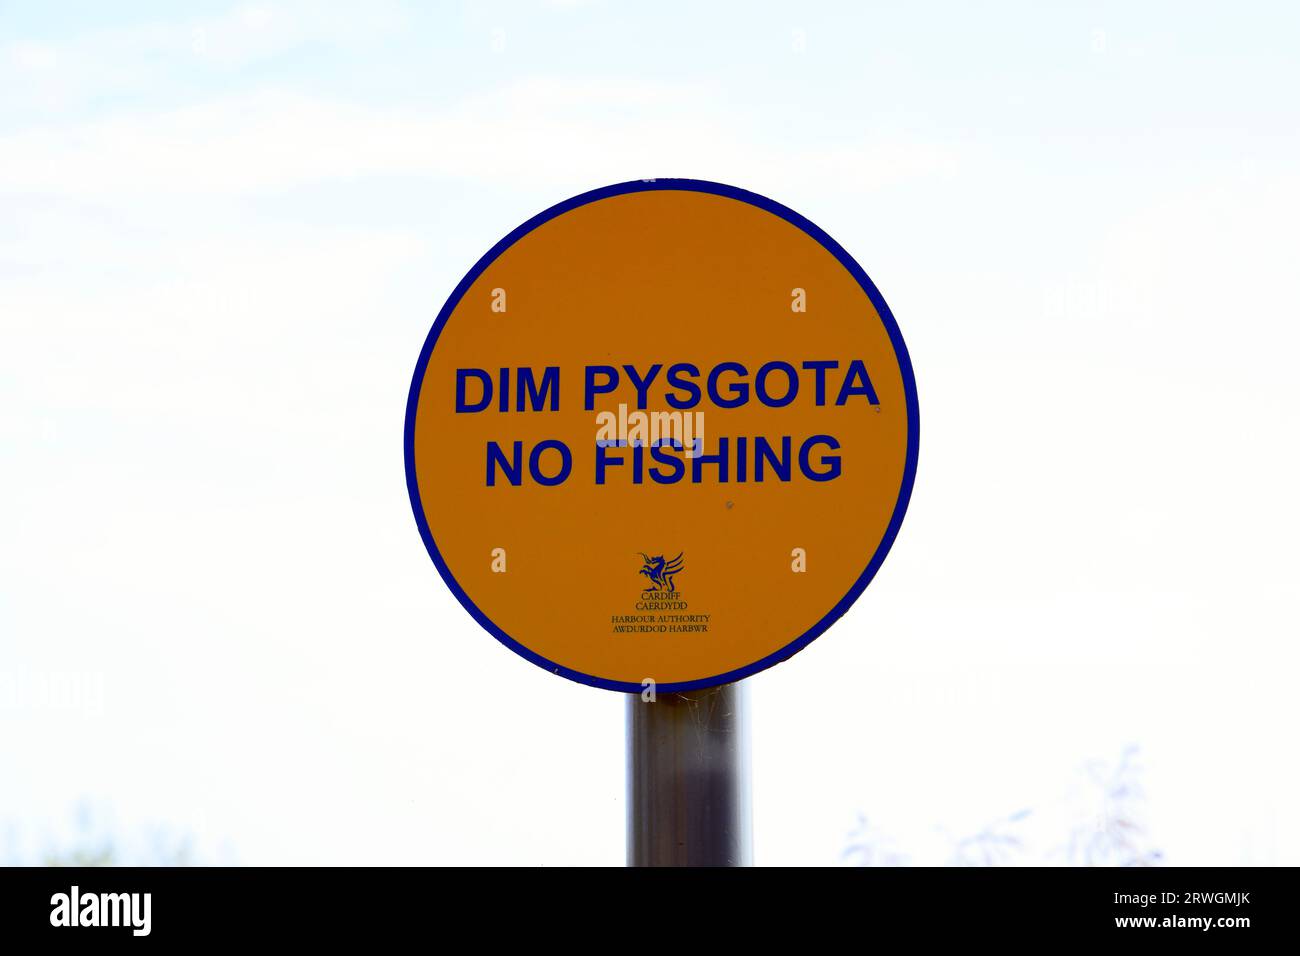 No fishing sign in English and Welsh, Cardiff Bay, Cardiff, Wales. Stock Photo